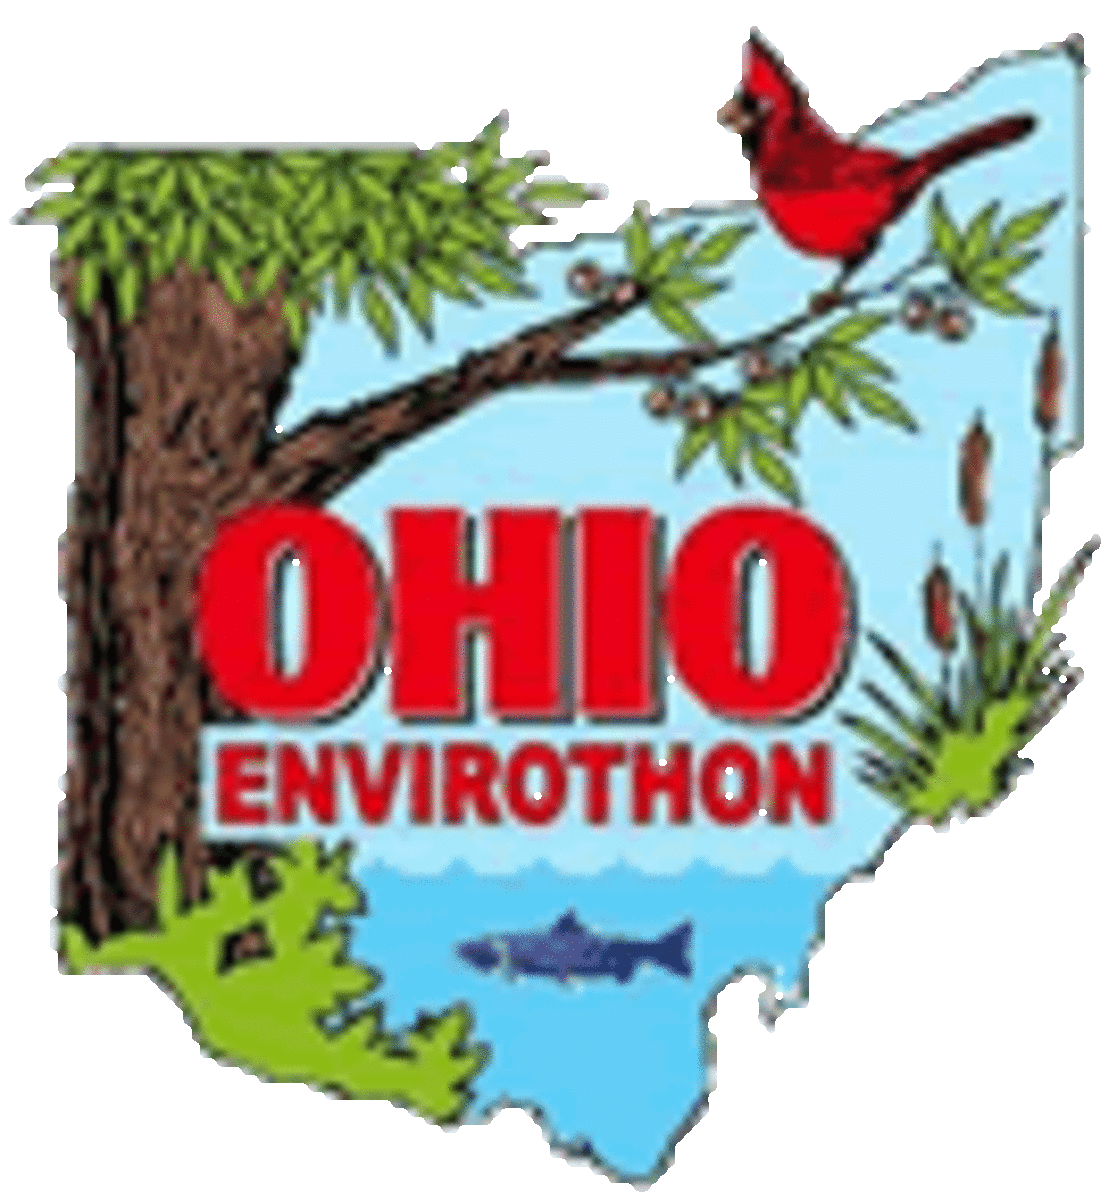 The 2015 Envirothon team is looking for more recruits. For more information visit Ron Hochstrasser, A.P. Environmental teacher.